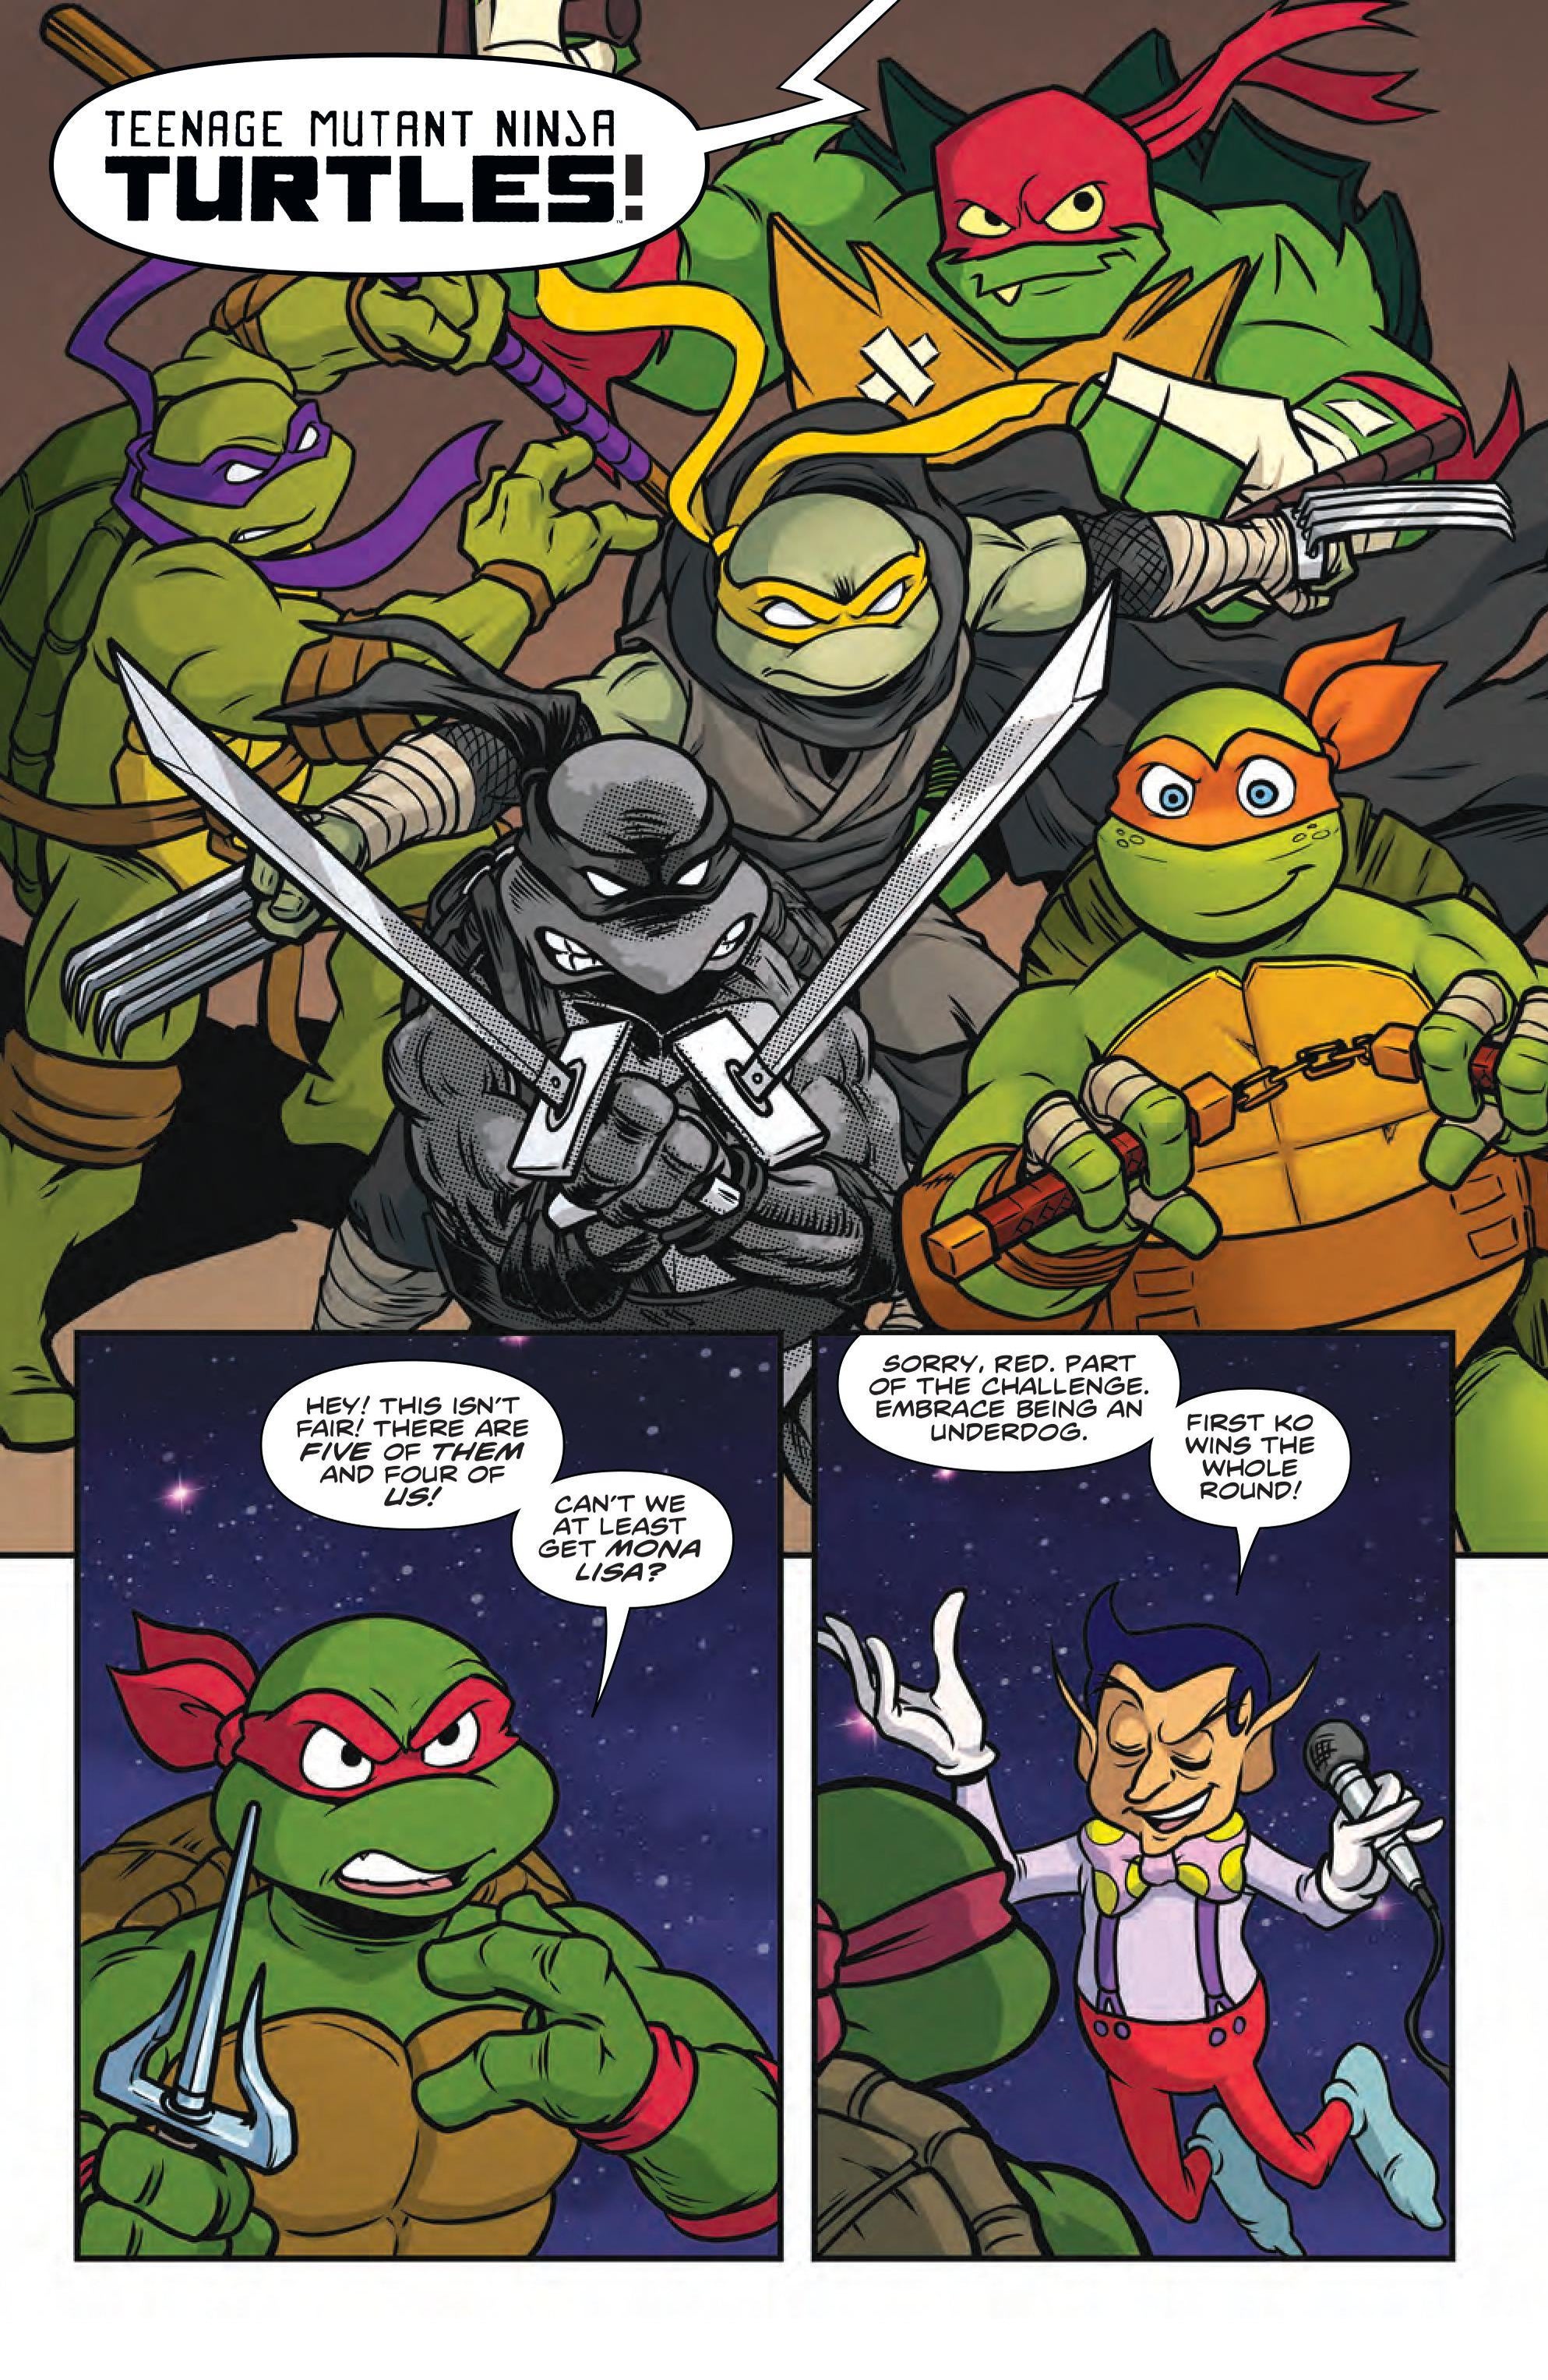 tmnt-sma-cont-13-lo-images-6.jpg